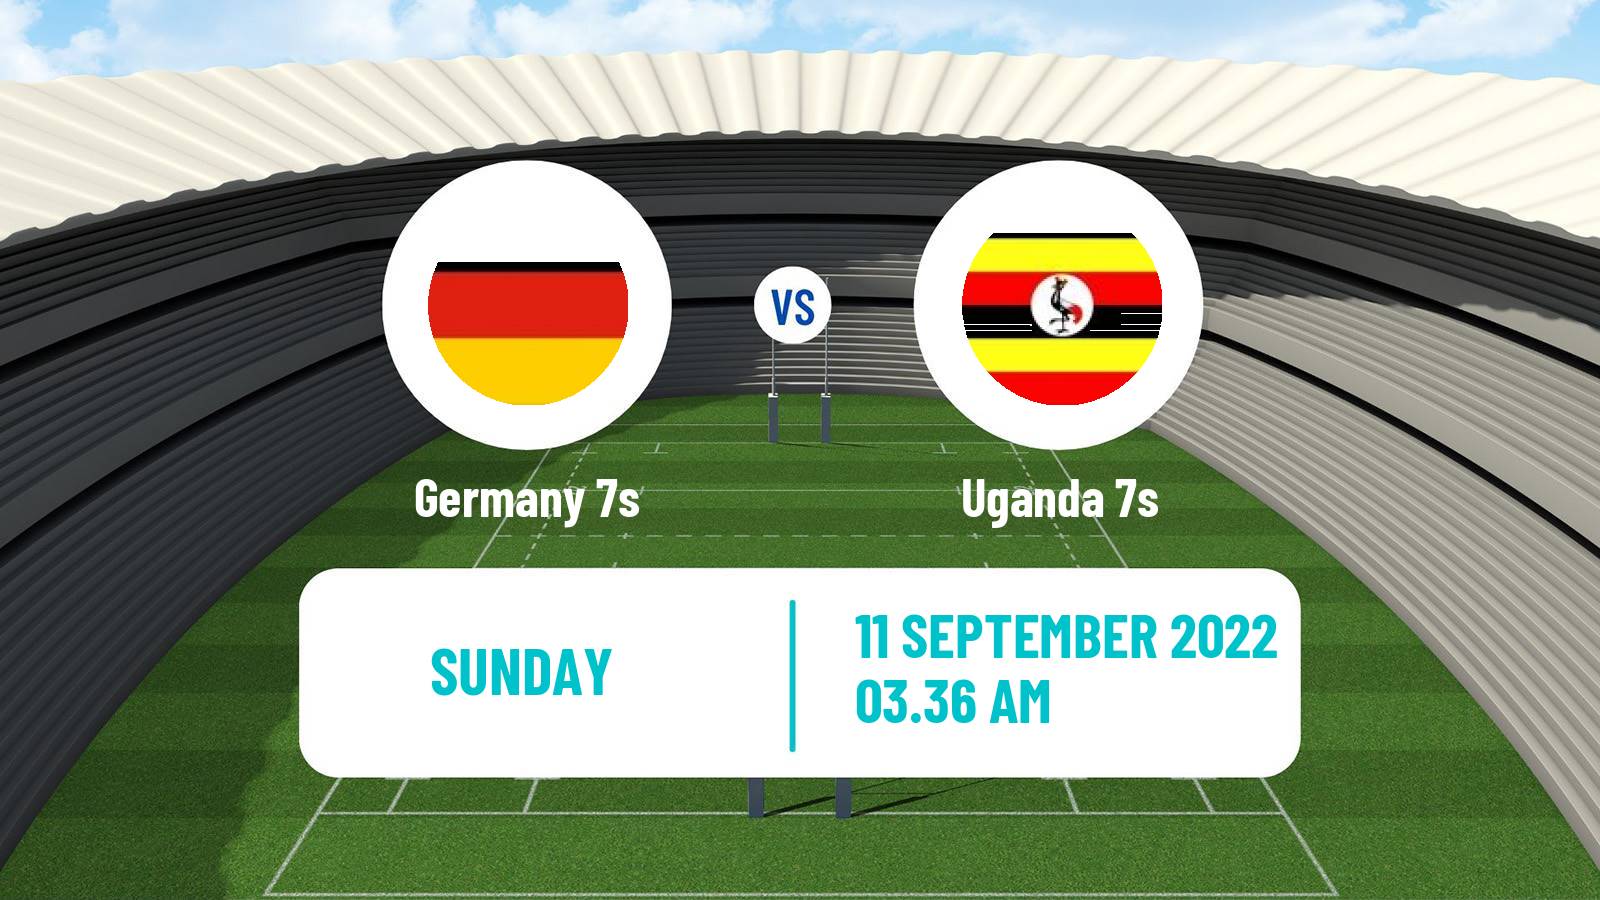 Rugby union Sevens World Cup Germany 7s - Uganda 7s